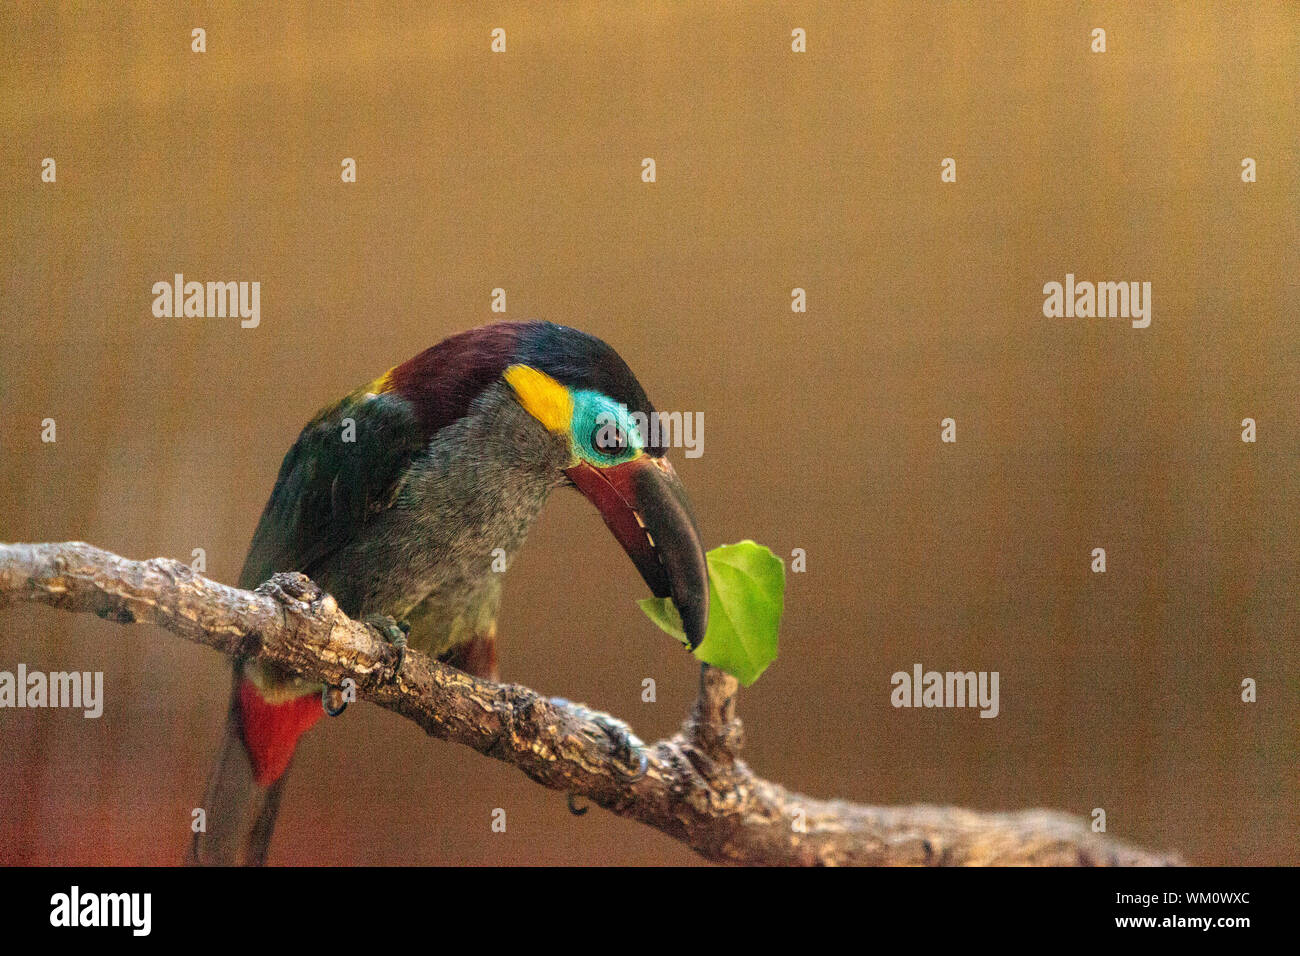 Close-up Of Toucan Eating Leaf While Perching On Branch In Cage Stock Photo